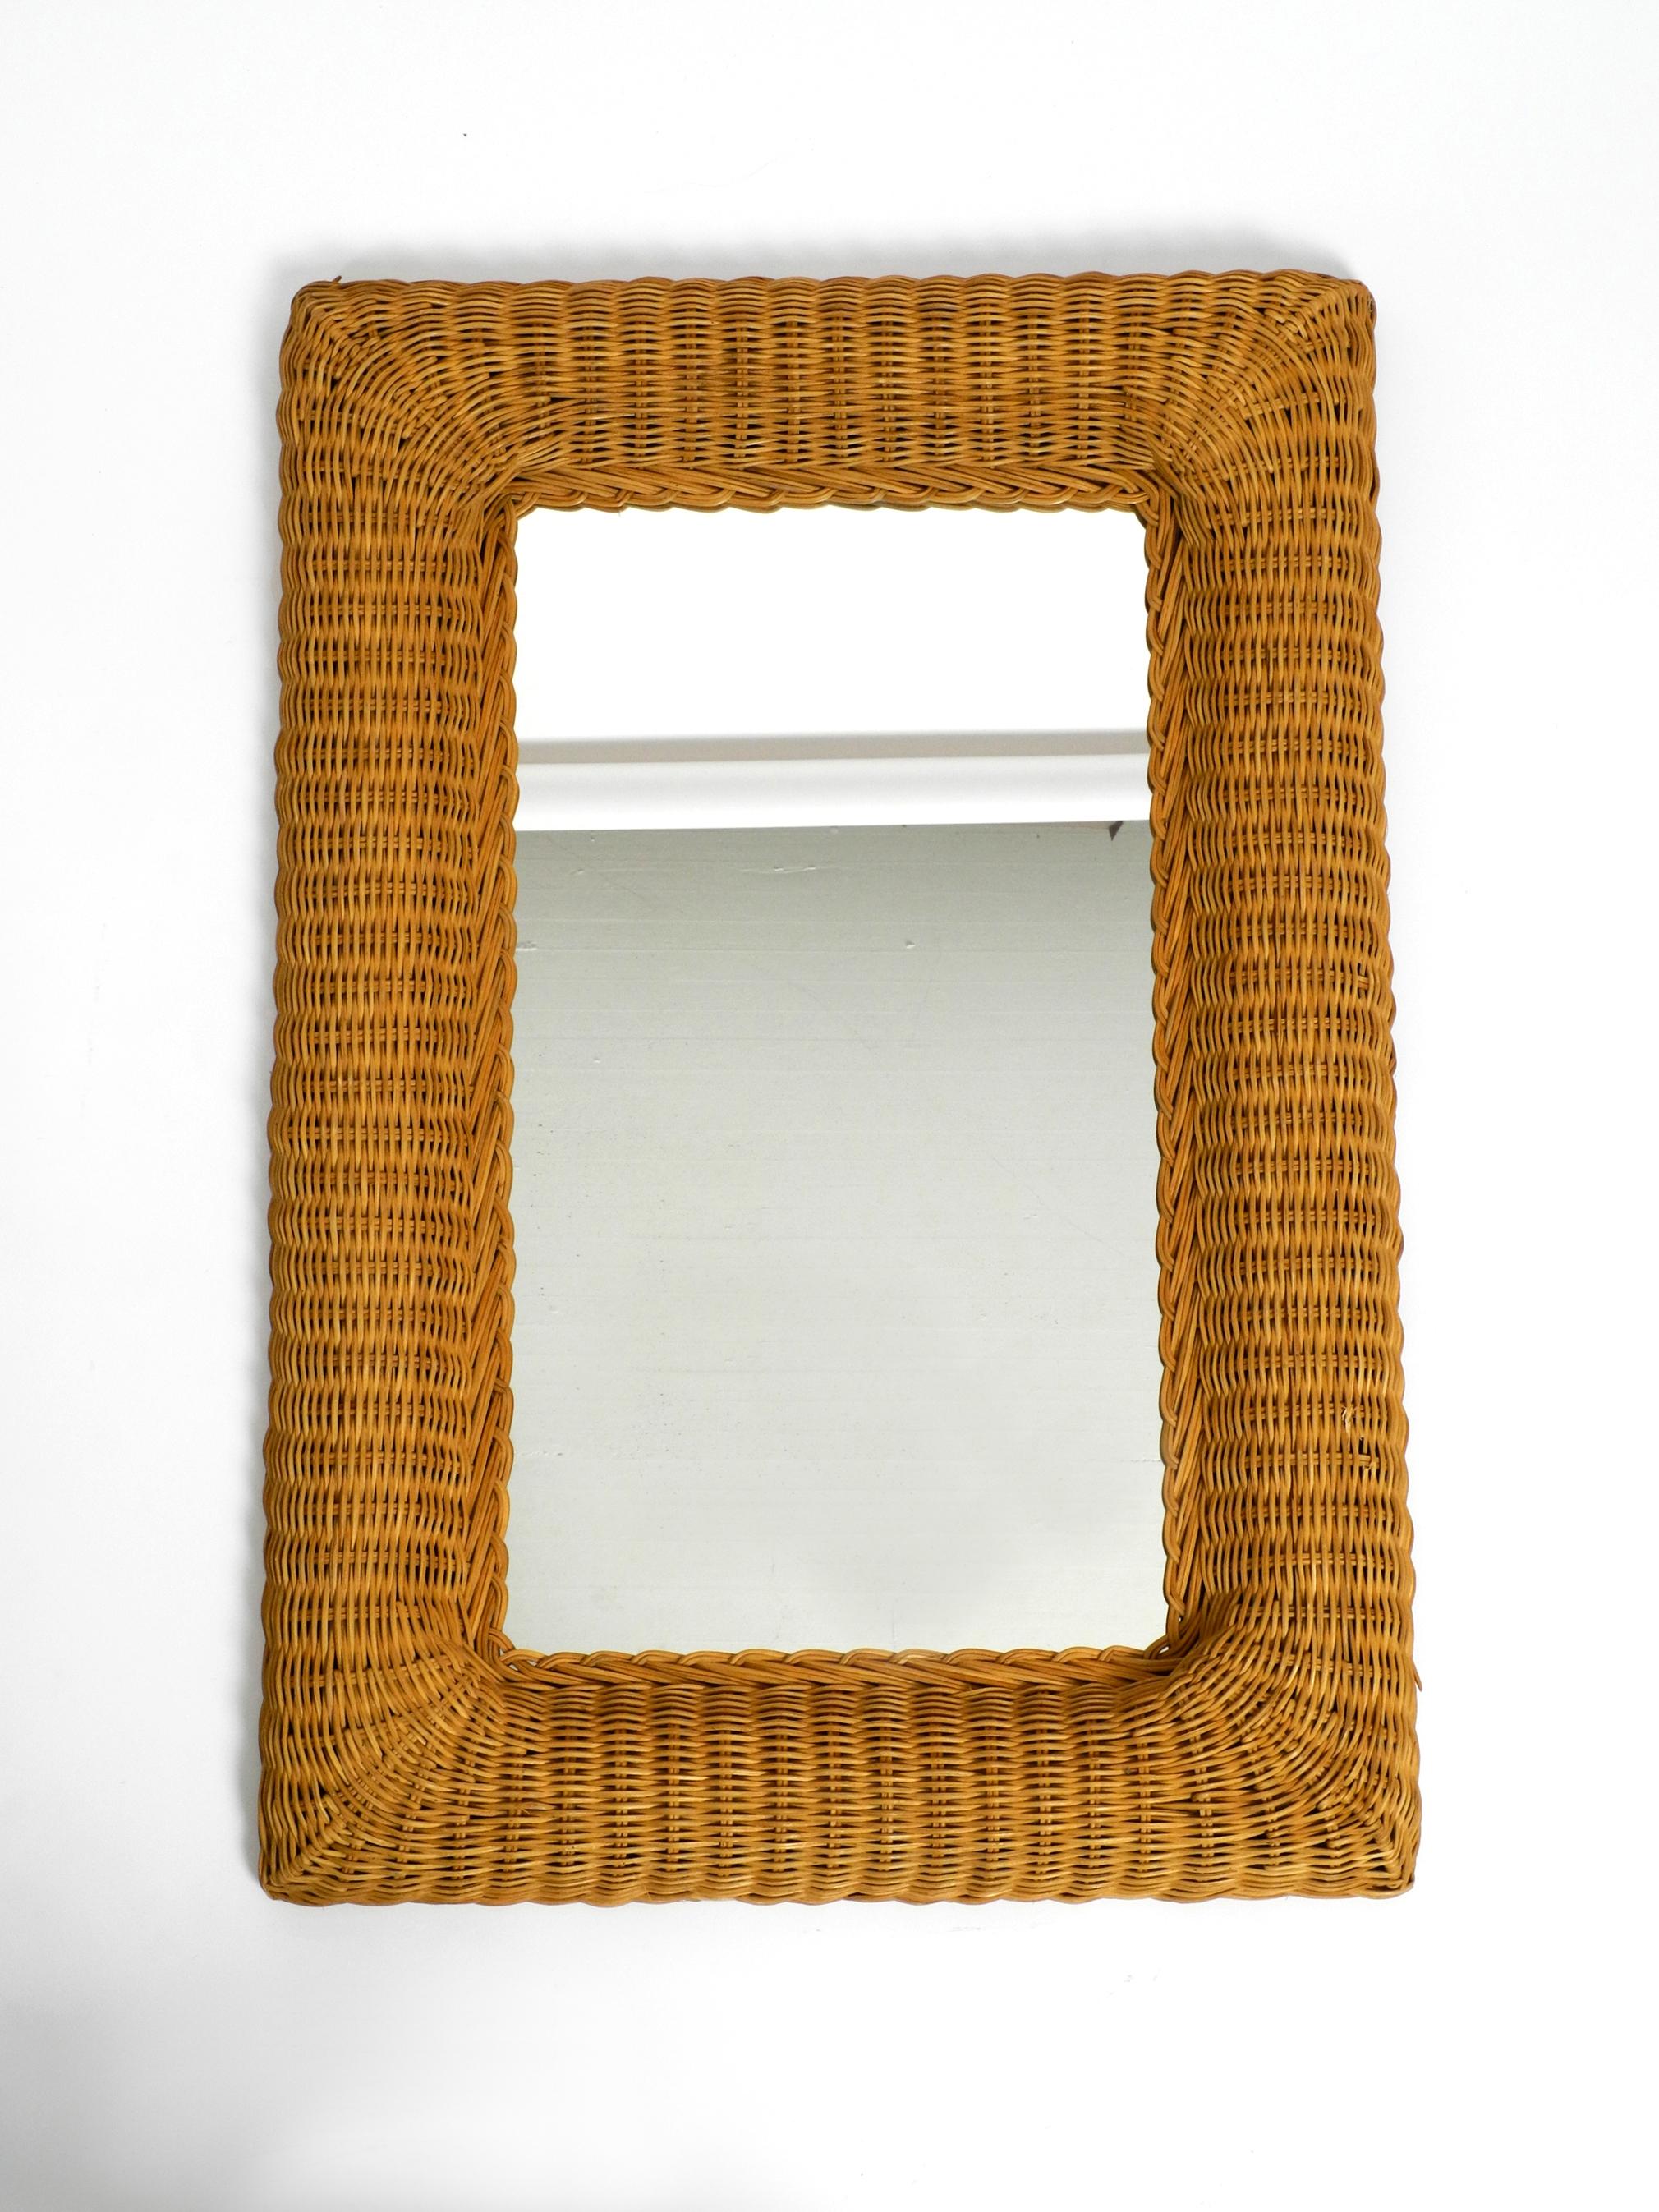 Beautiful rare large wall mirror with a wide frame made of wicker from the 1960s.
Frame on the back is made of two pieces wood.
Minimalistic very elegant design. Made in Italy.
Mirror is without damages. Not blind.
Just a few small fine blind